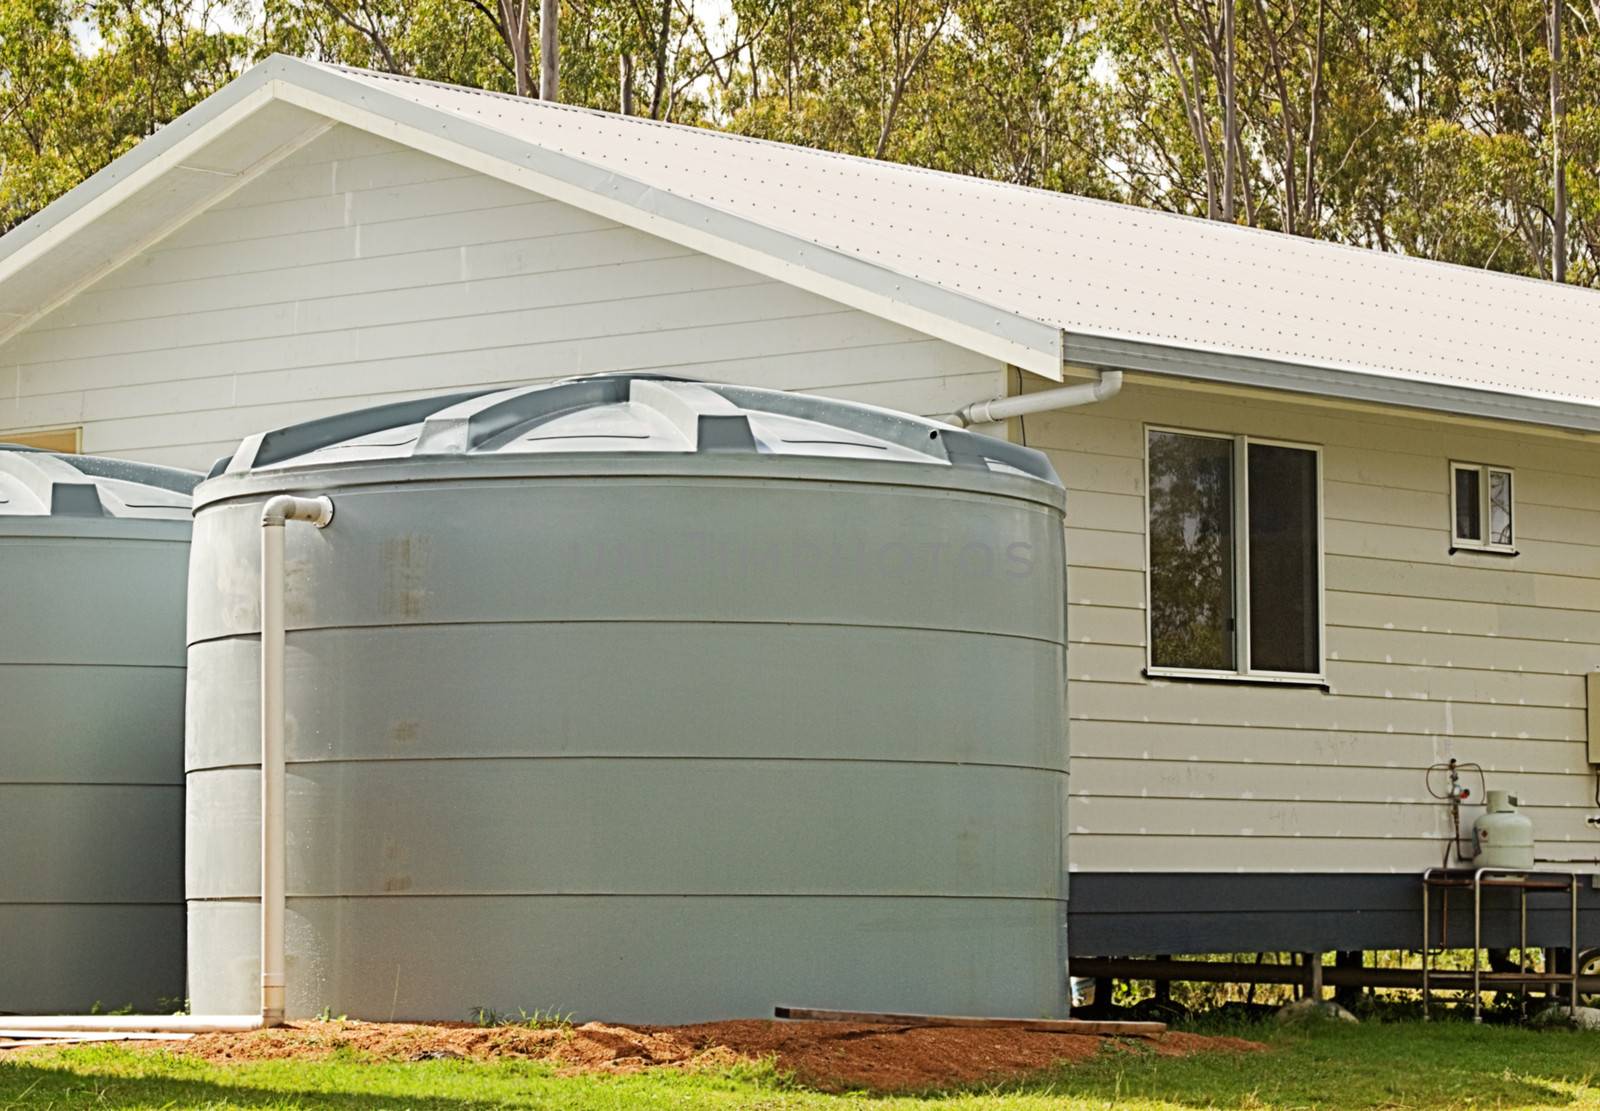 Rainwater conservation tanks on new house by sherj